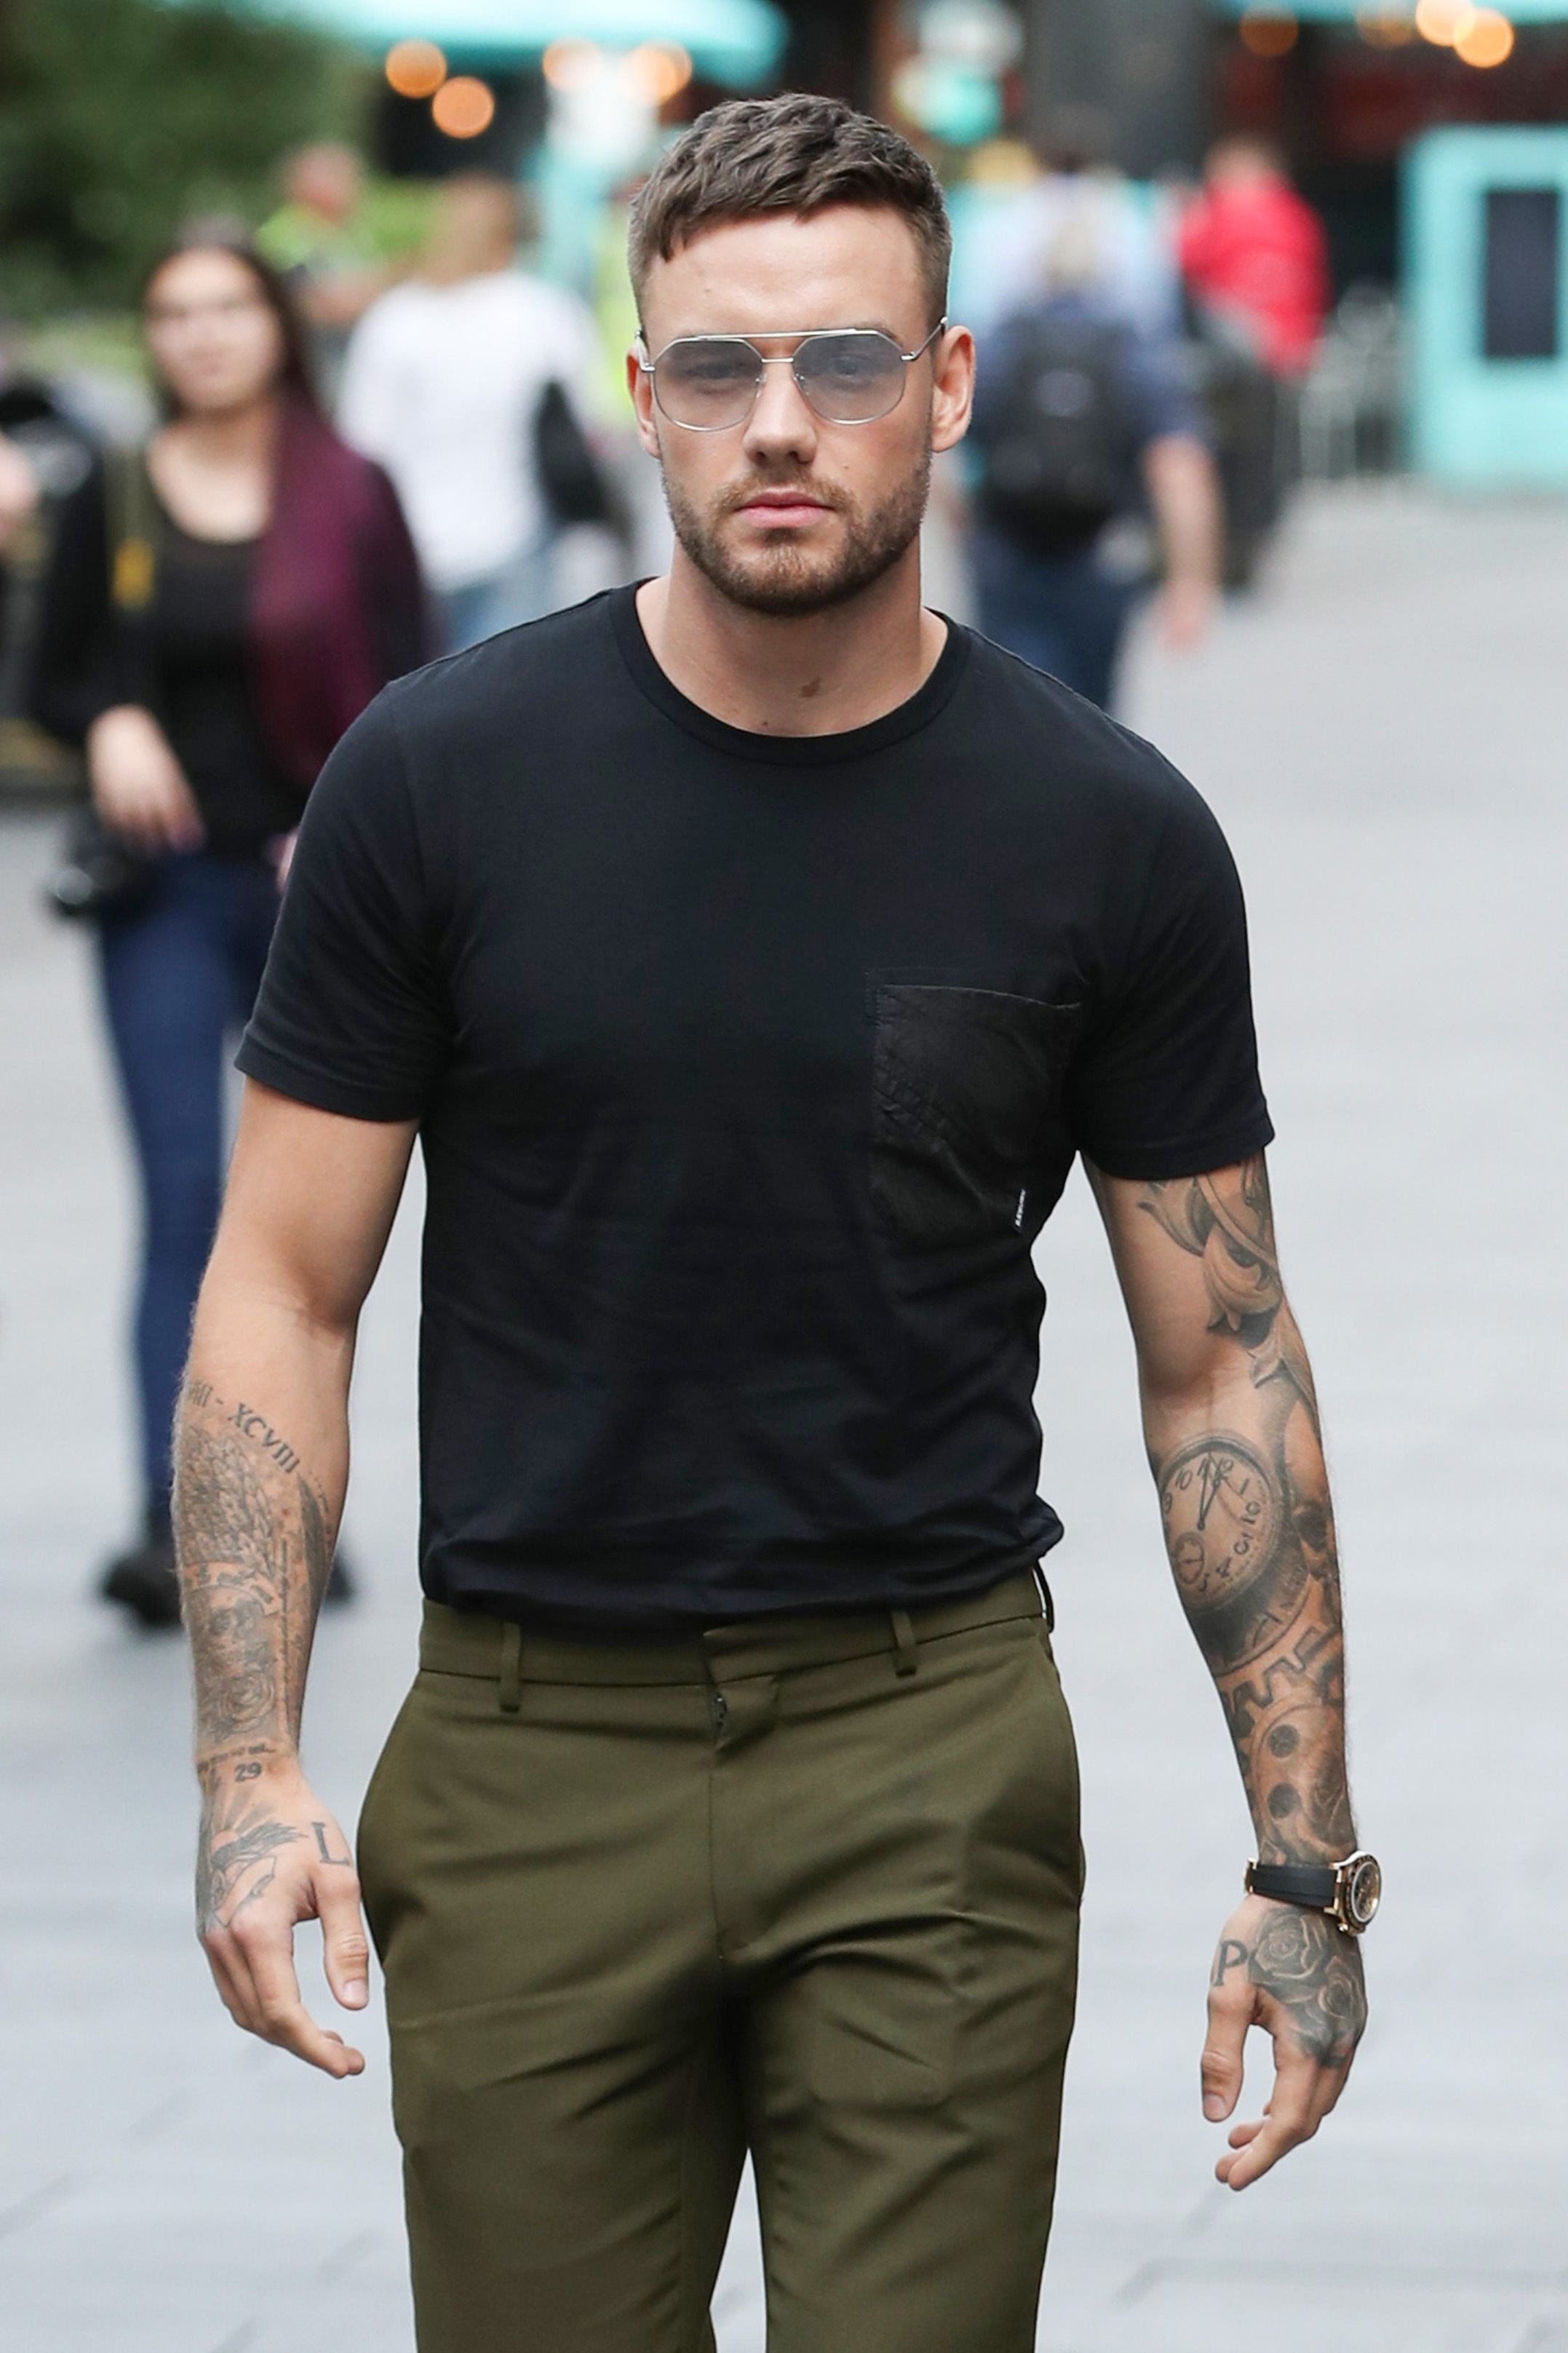 Liam Payne - Week in celebrity photos for Sept. 2-6, 2019 | Gallery ...